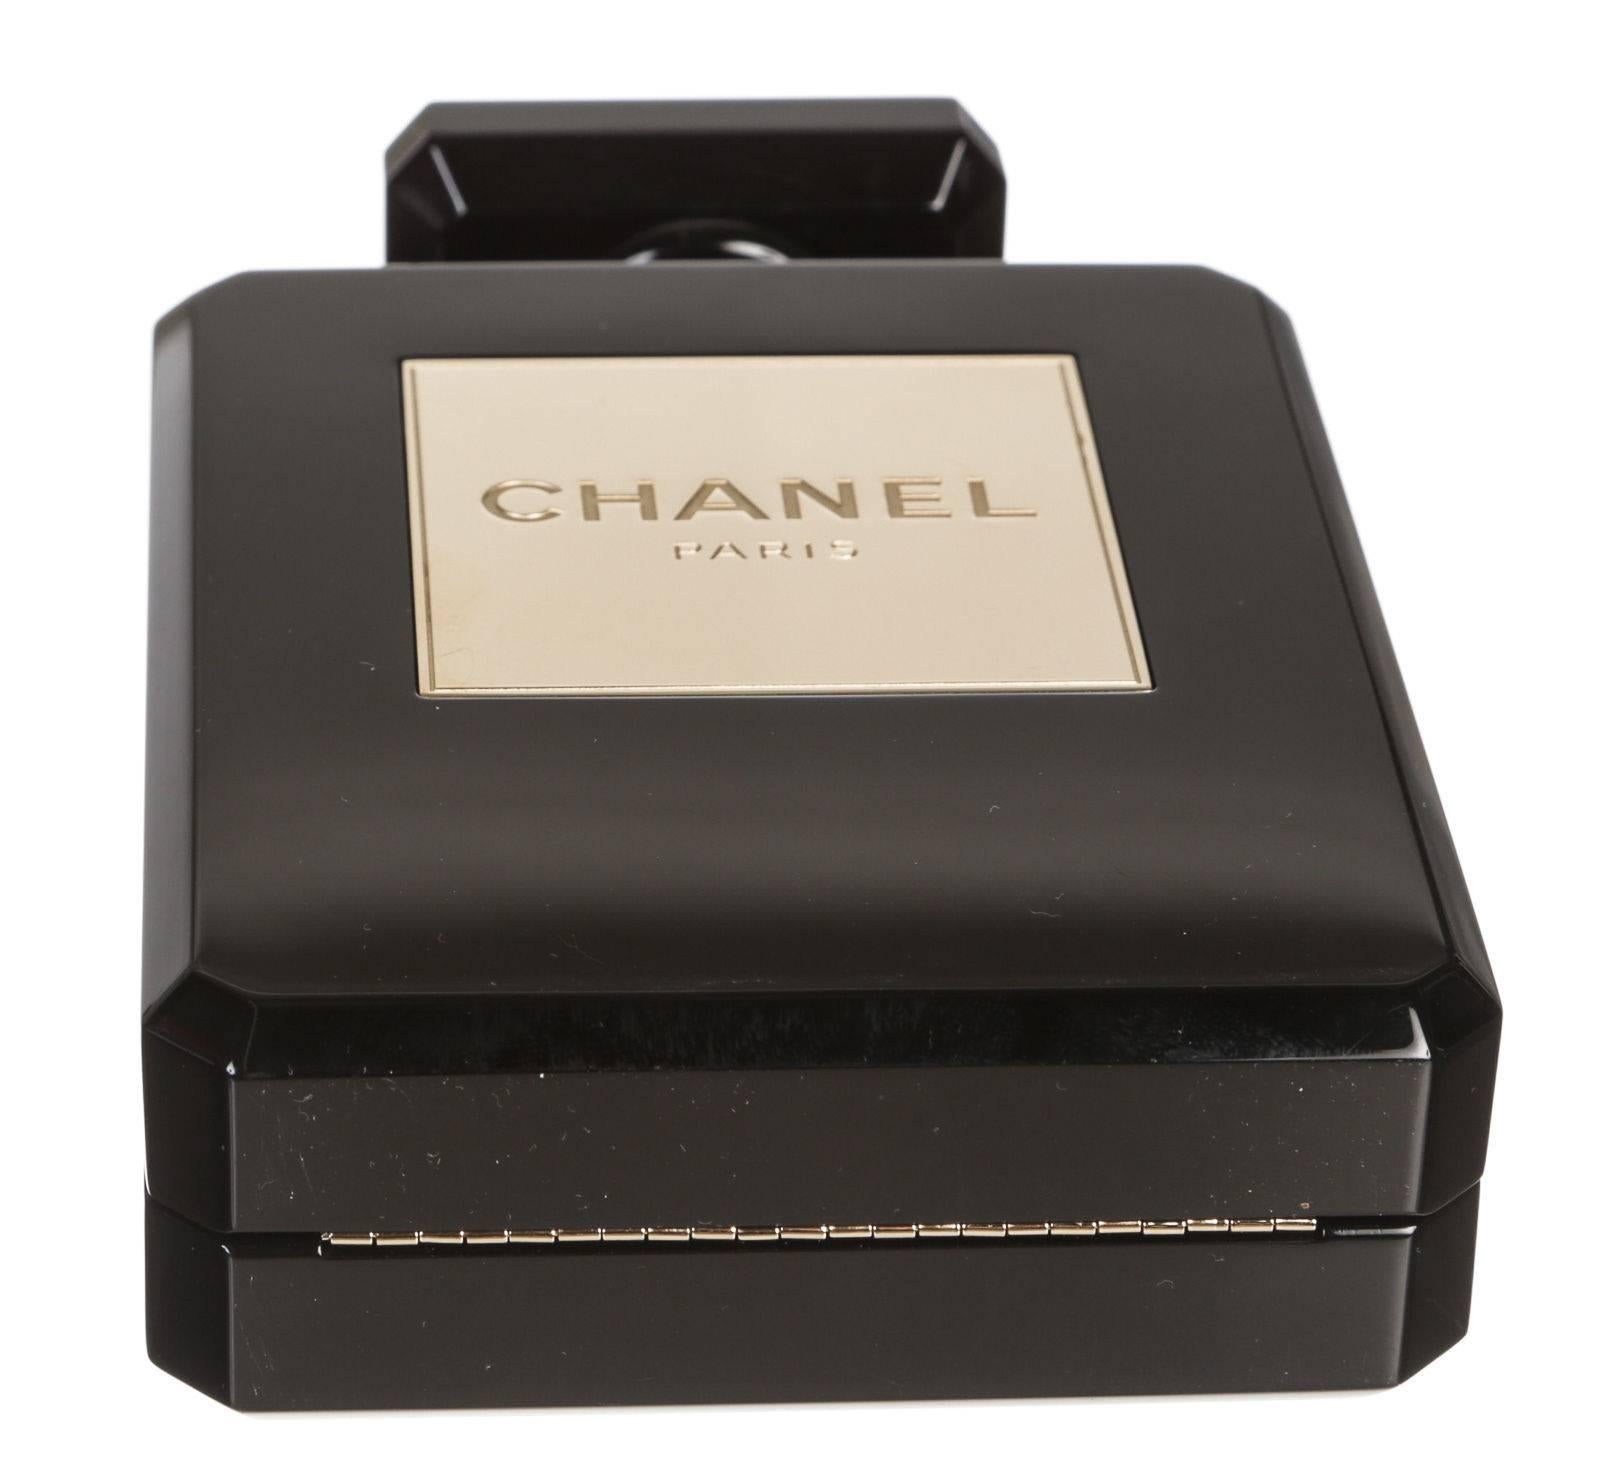  Don't let this little beauty slip past your fingers, buy it now and here while you still can. This phenomenal Chanel No.5 Perfume Bottle Clutch was designed after the simplistic and iconic Chanel No.5 perfume bottle. It has made its way into our